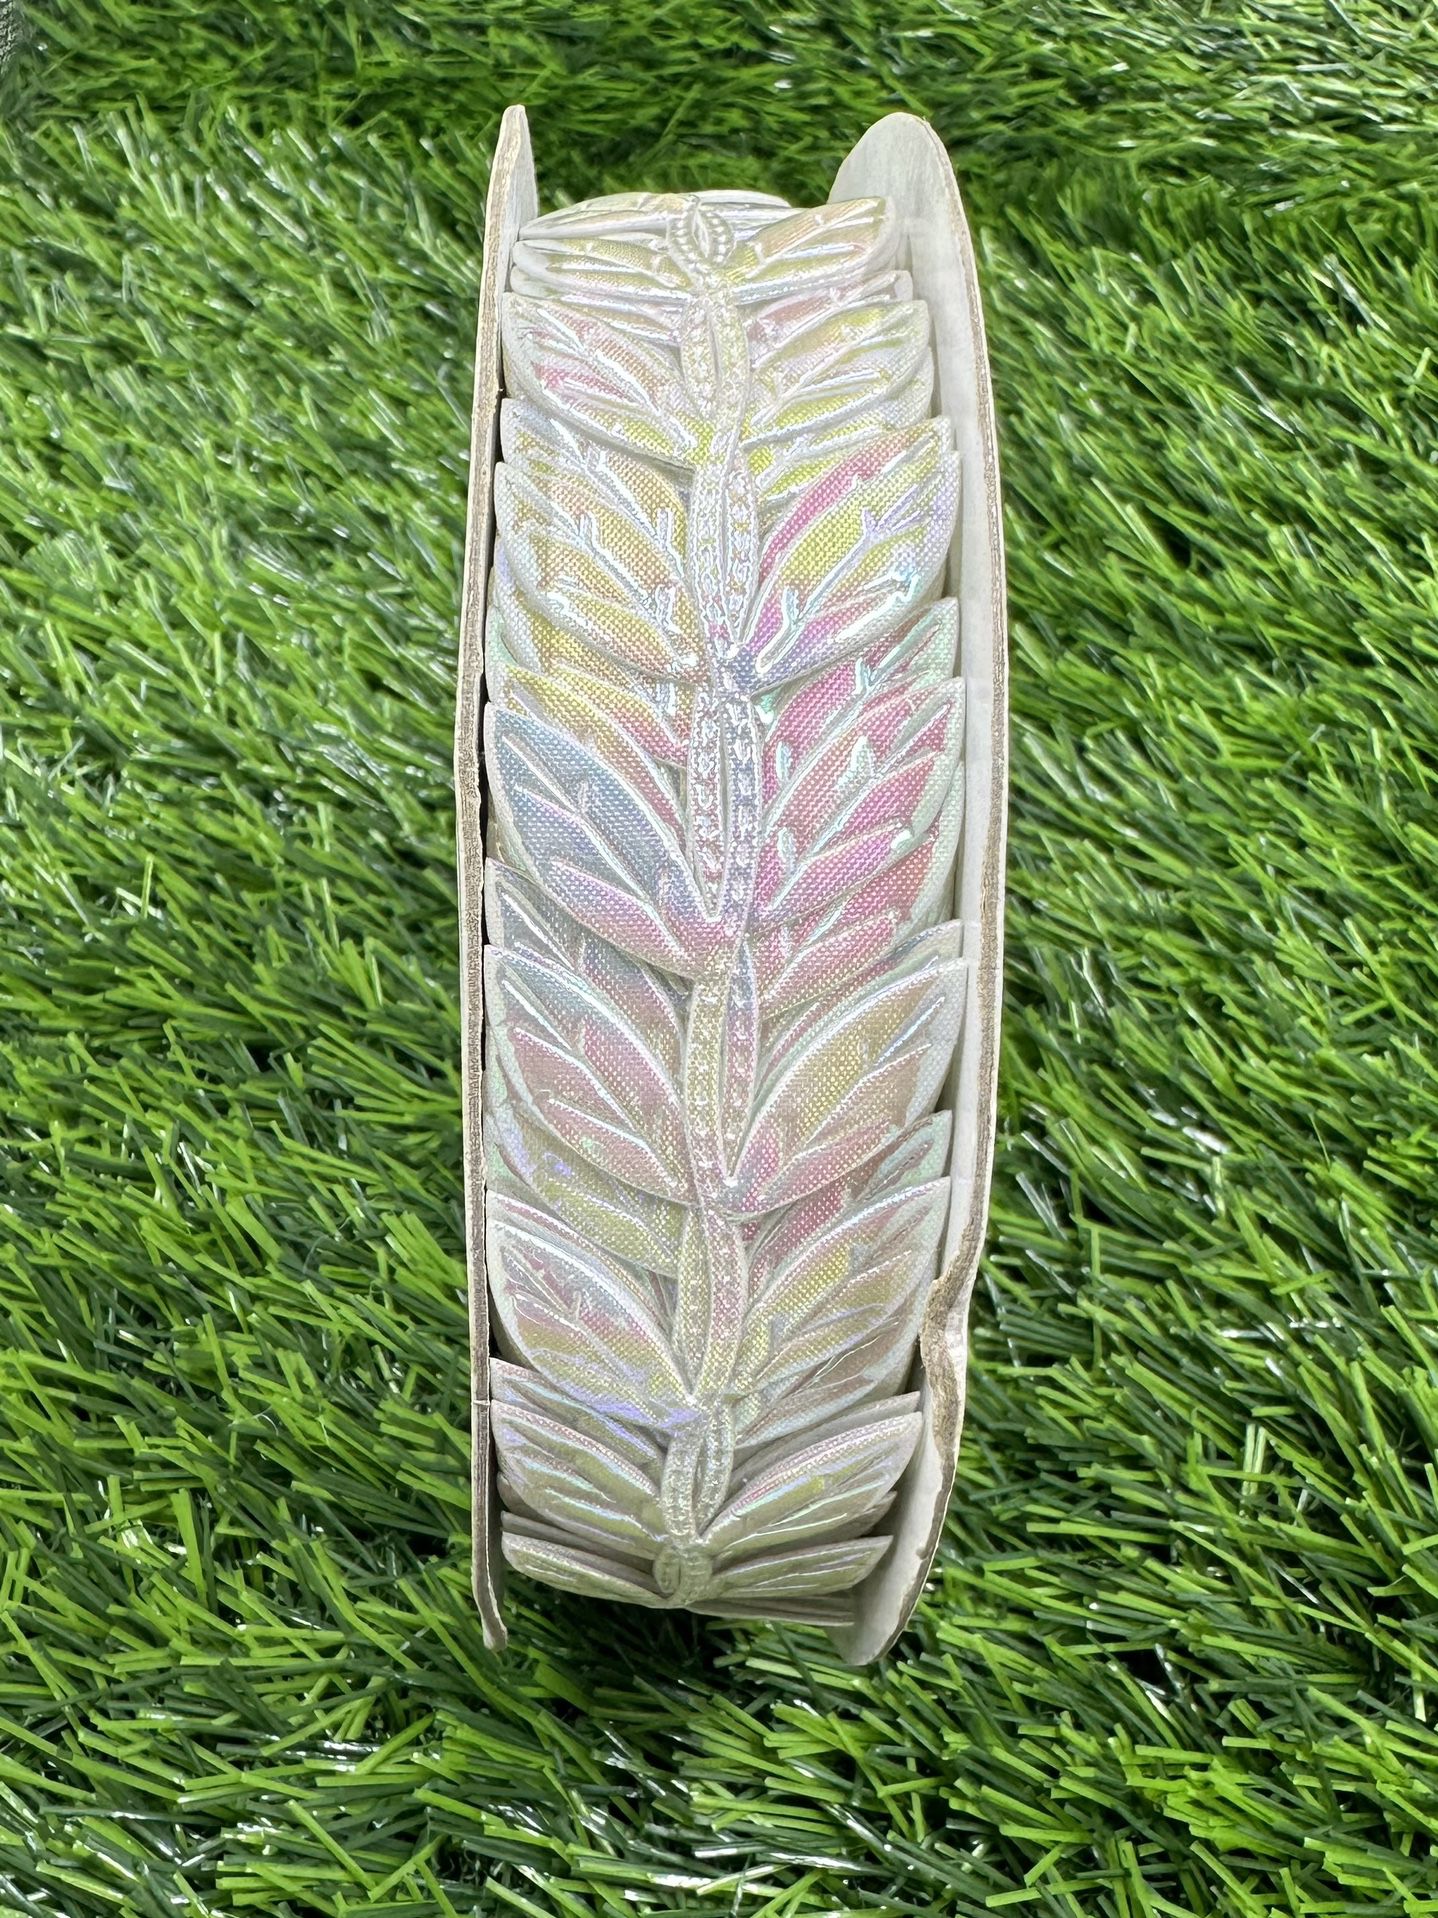 Wedding Ribbon Leaf Decoration for Party Favors Or Centerpieces 25 Yard Roll